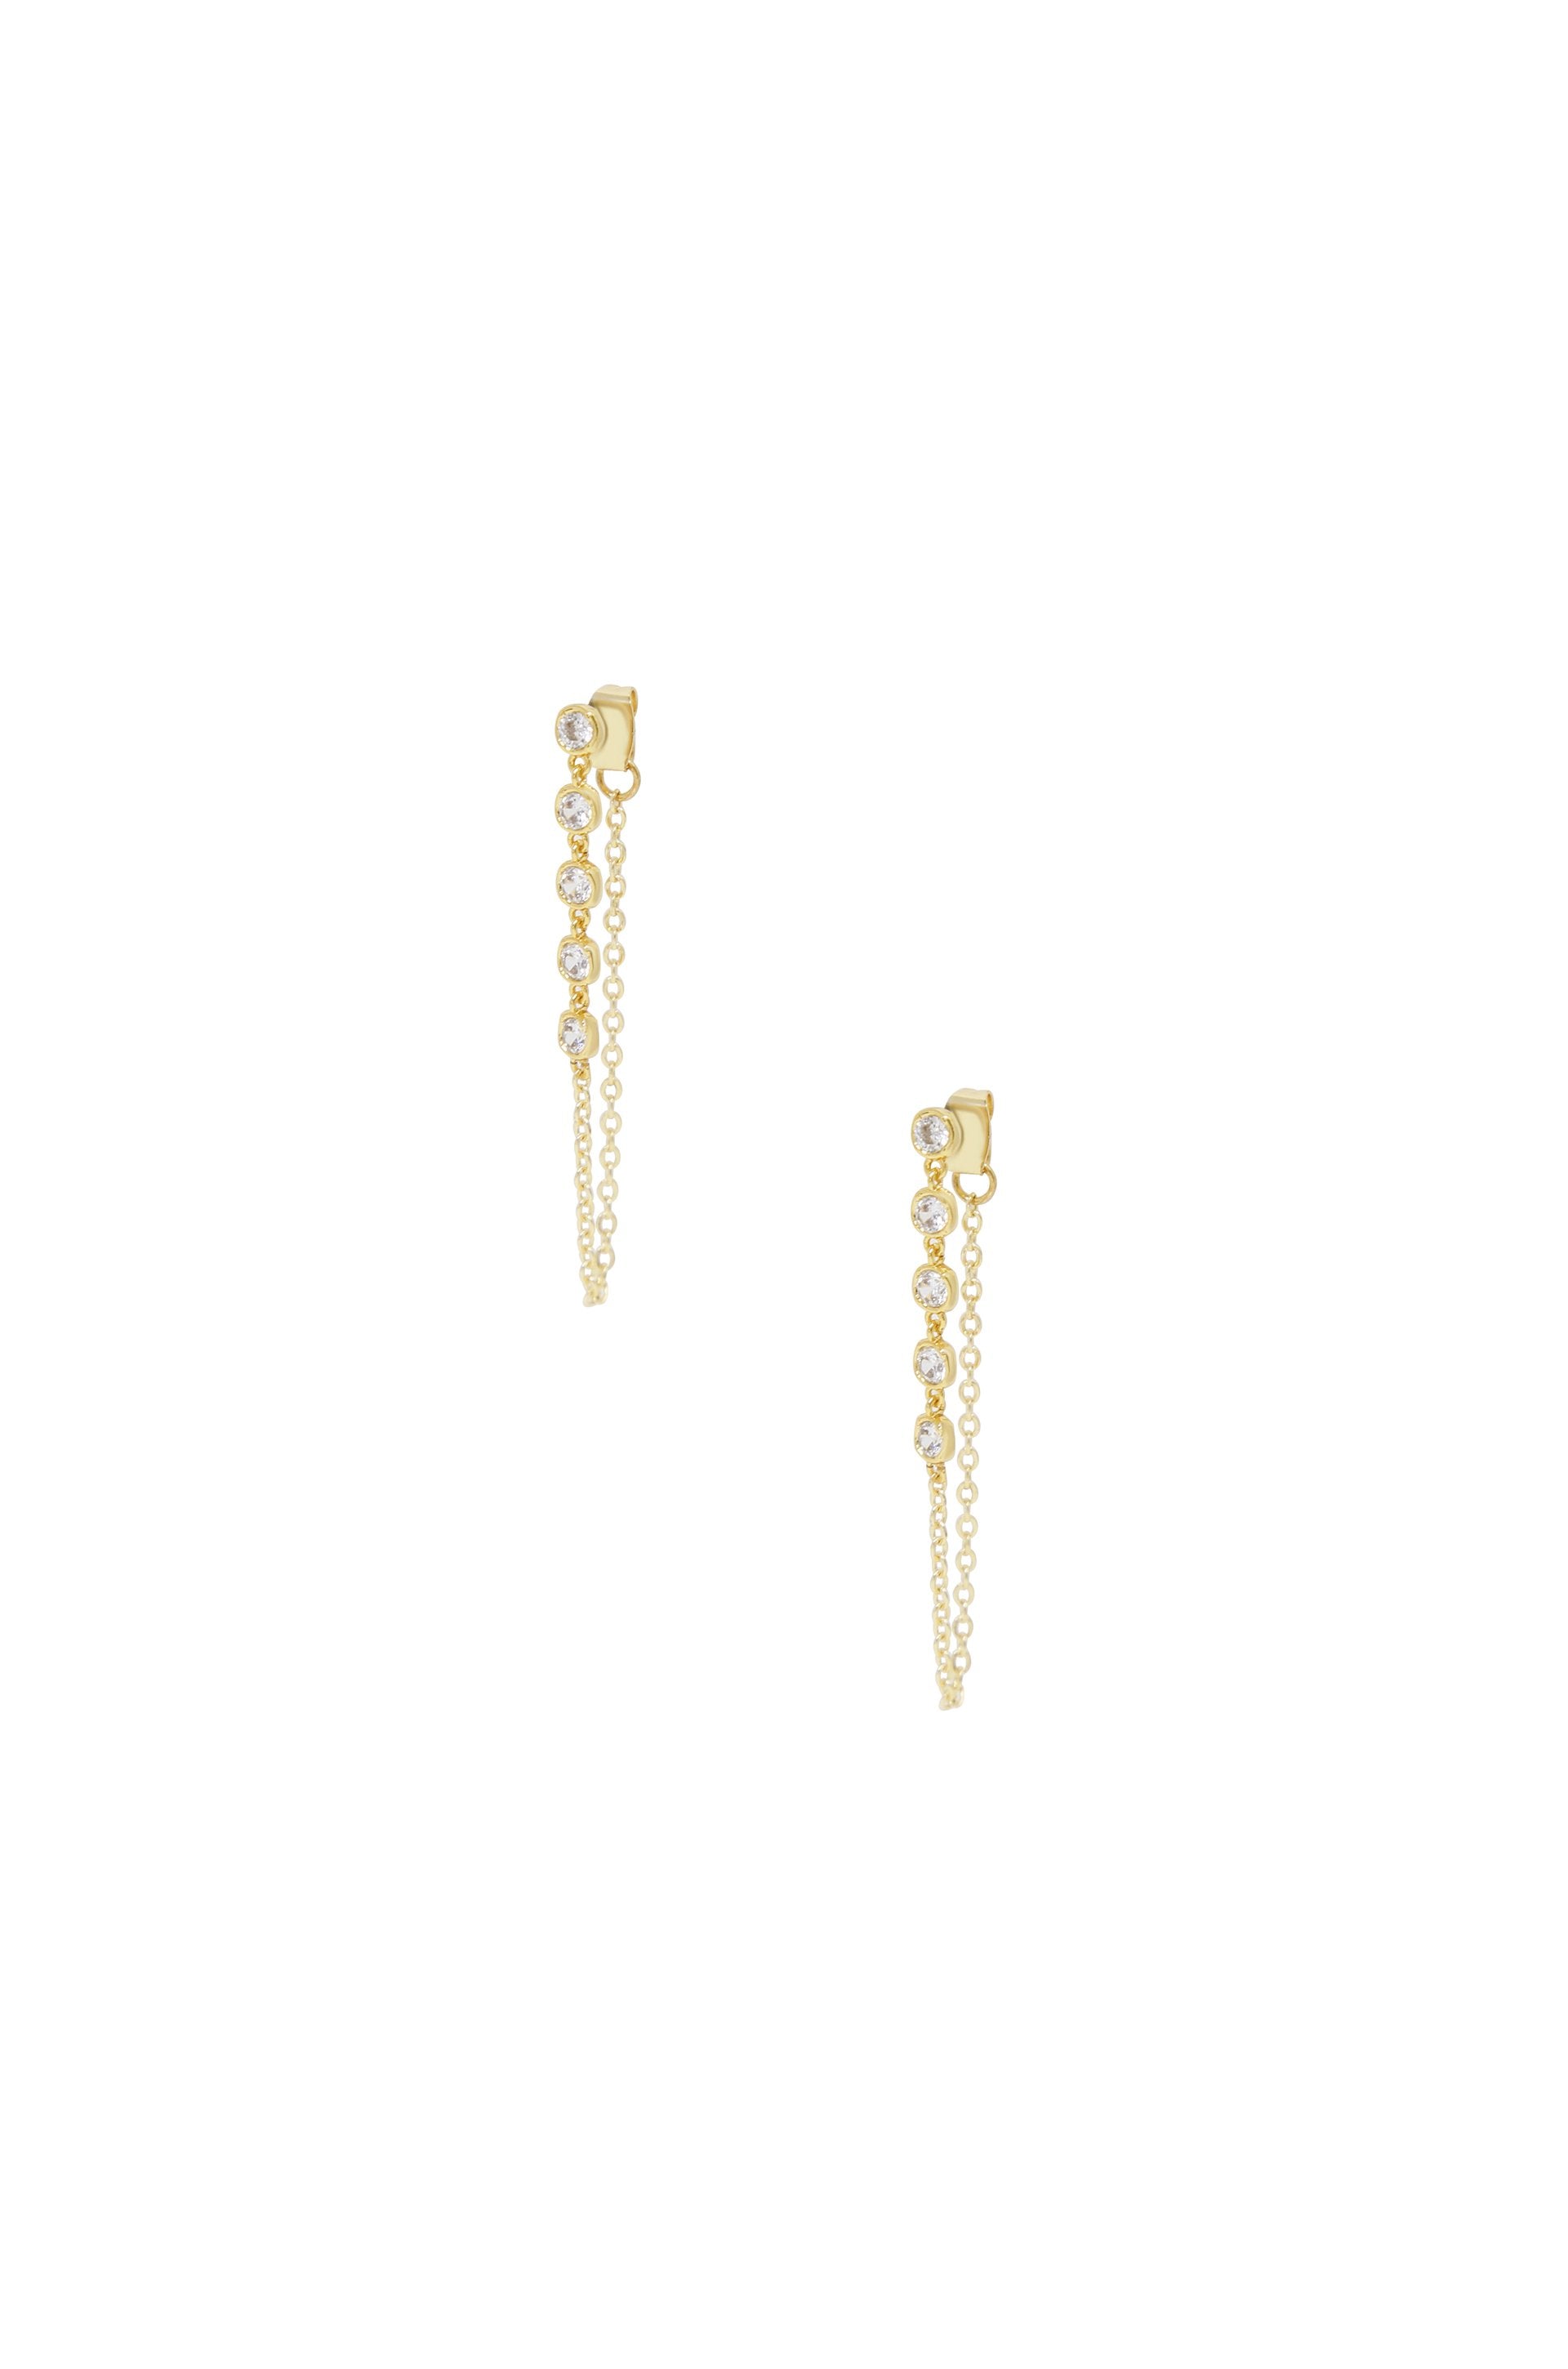 Crystal Chain Danglers 18k Gold Plated Earring on white background  